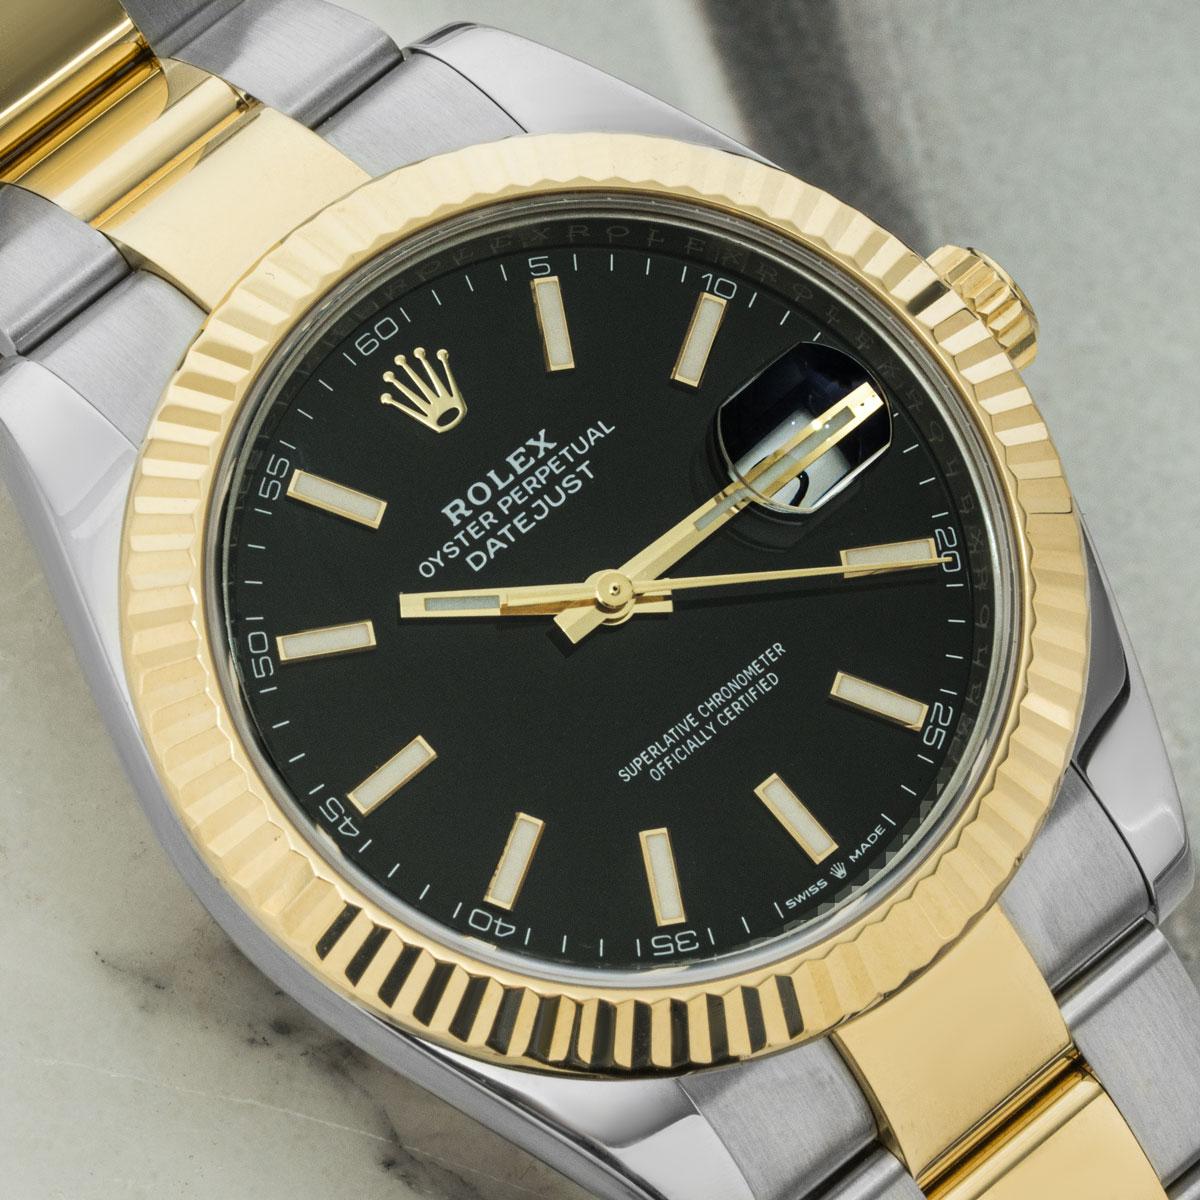 A steel and gold 41mm mens Datejust by Rolex. Featuring a black dial with applied hour markers and a smooth yellow gold bezel. Fitted with a sapphire crystal, a self-winding automatic movement, a steel and gold Oyster bracelet equipped with a